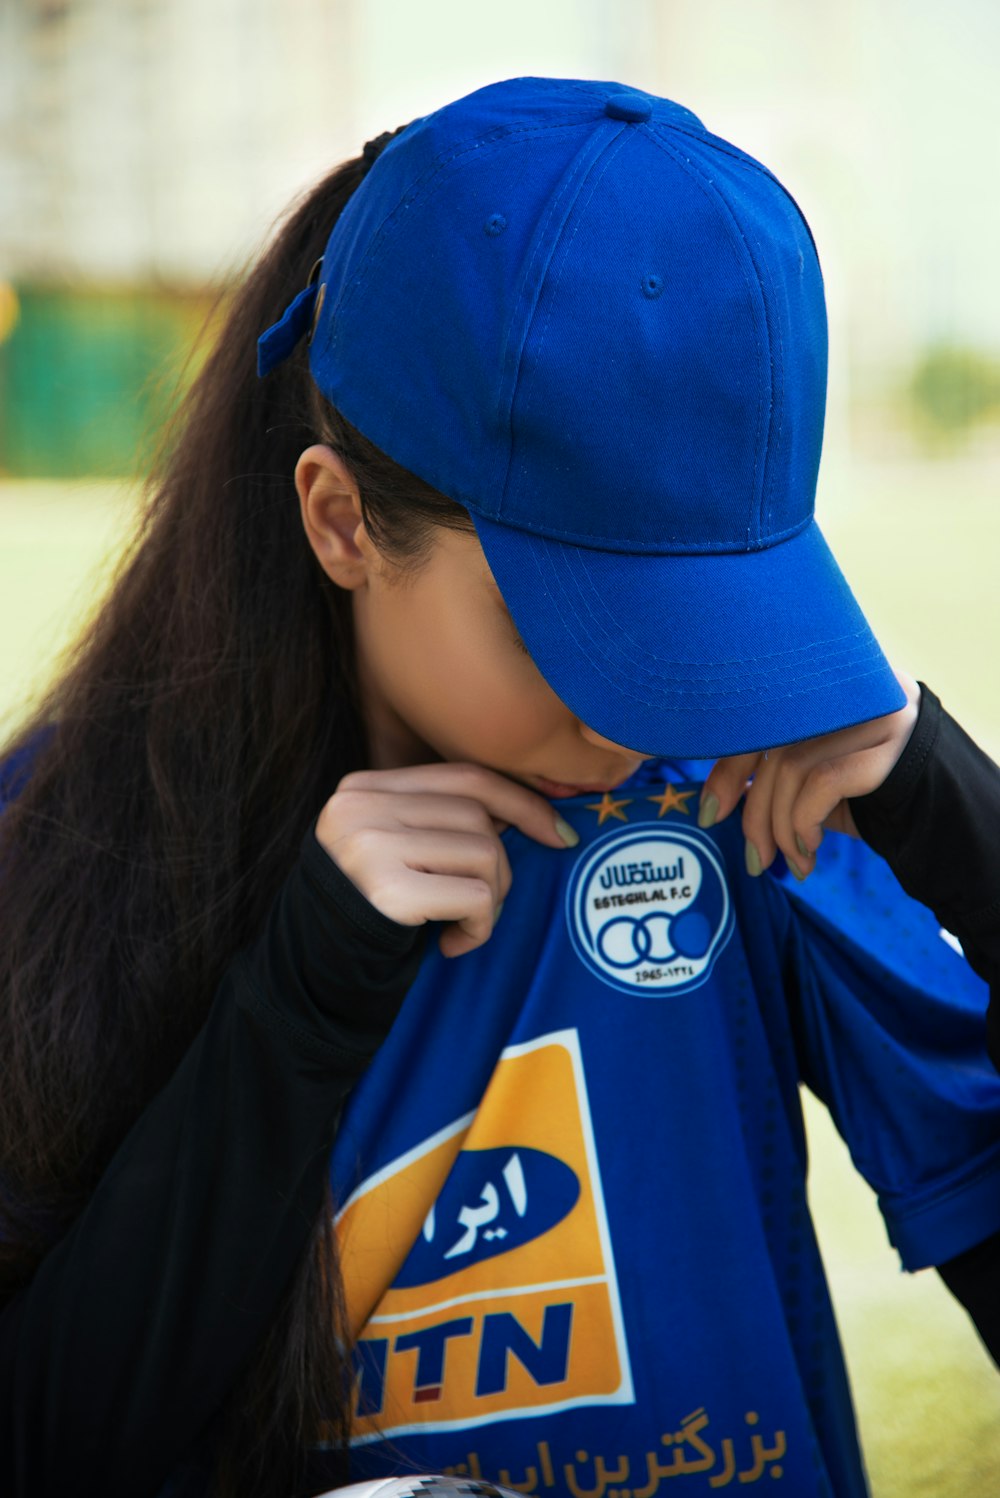 a young woman wearing a blue hat and a blue shirt